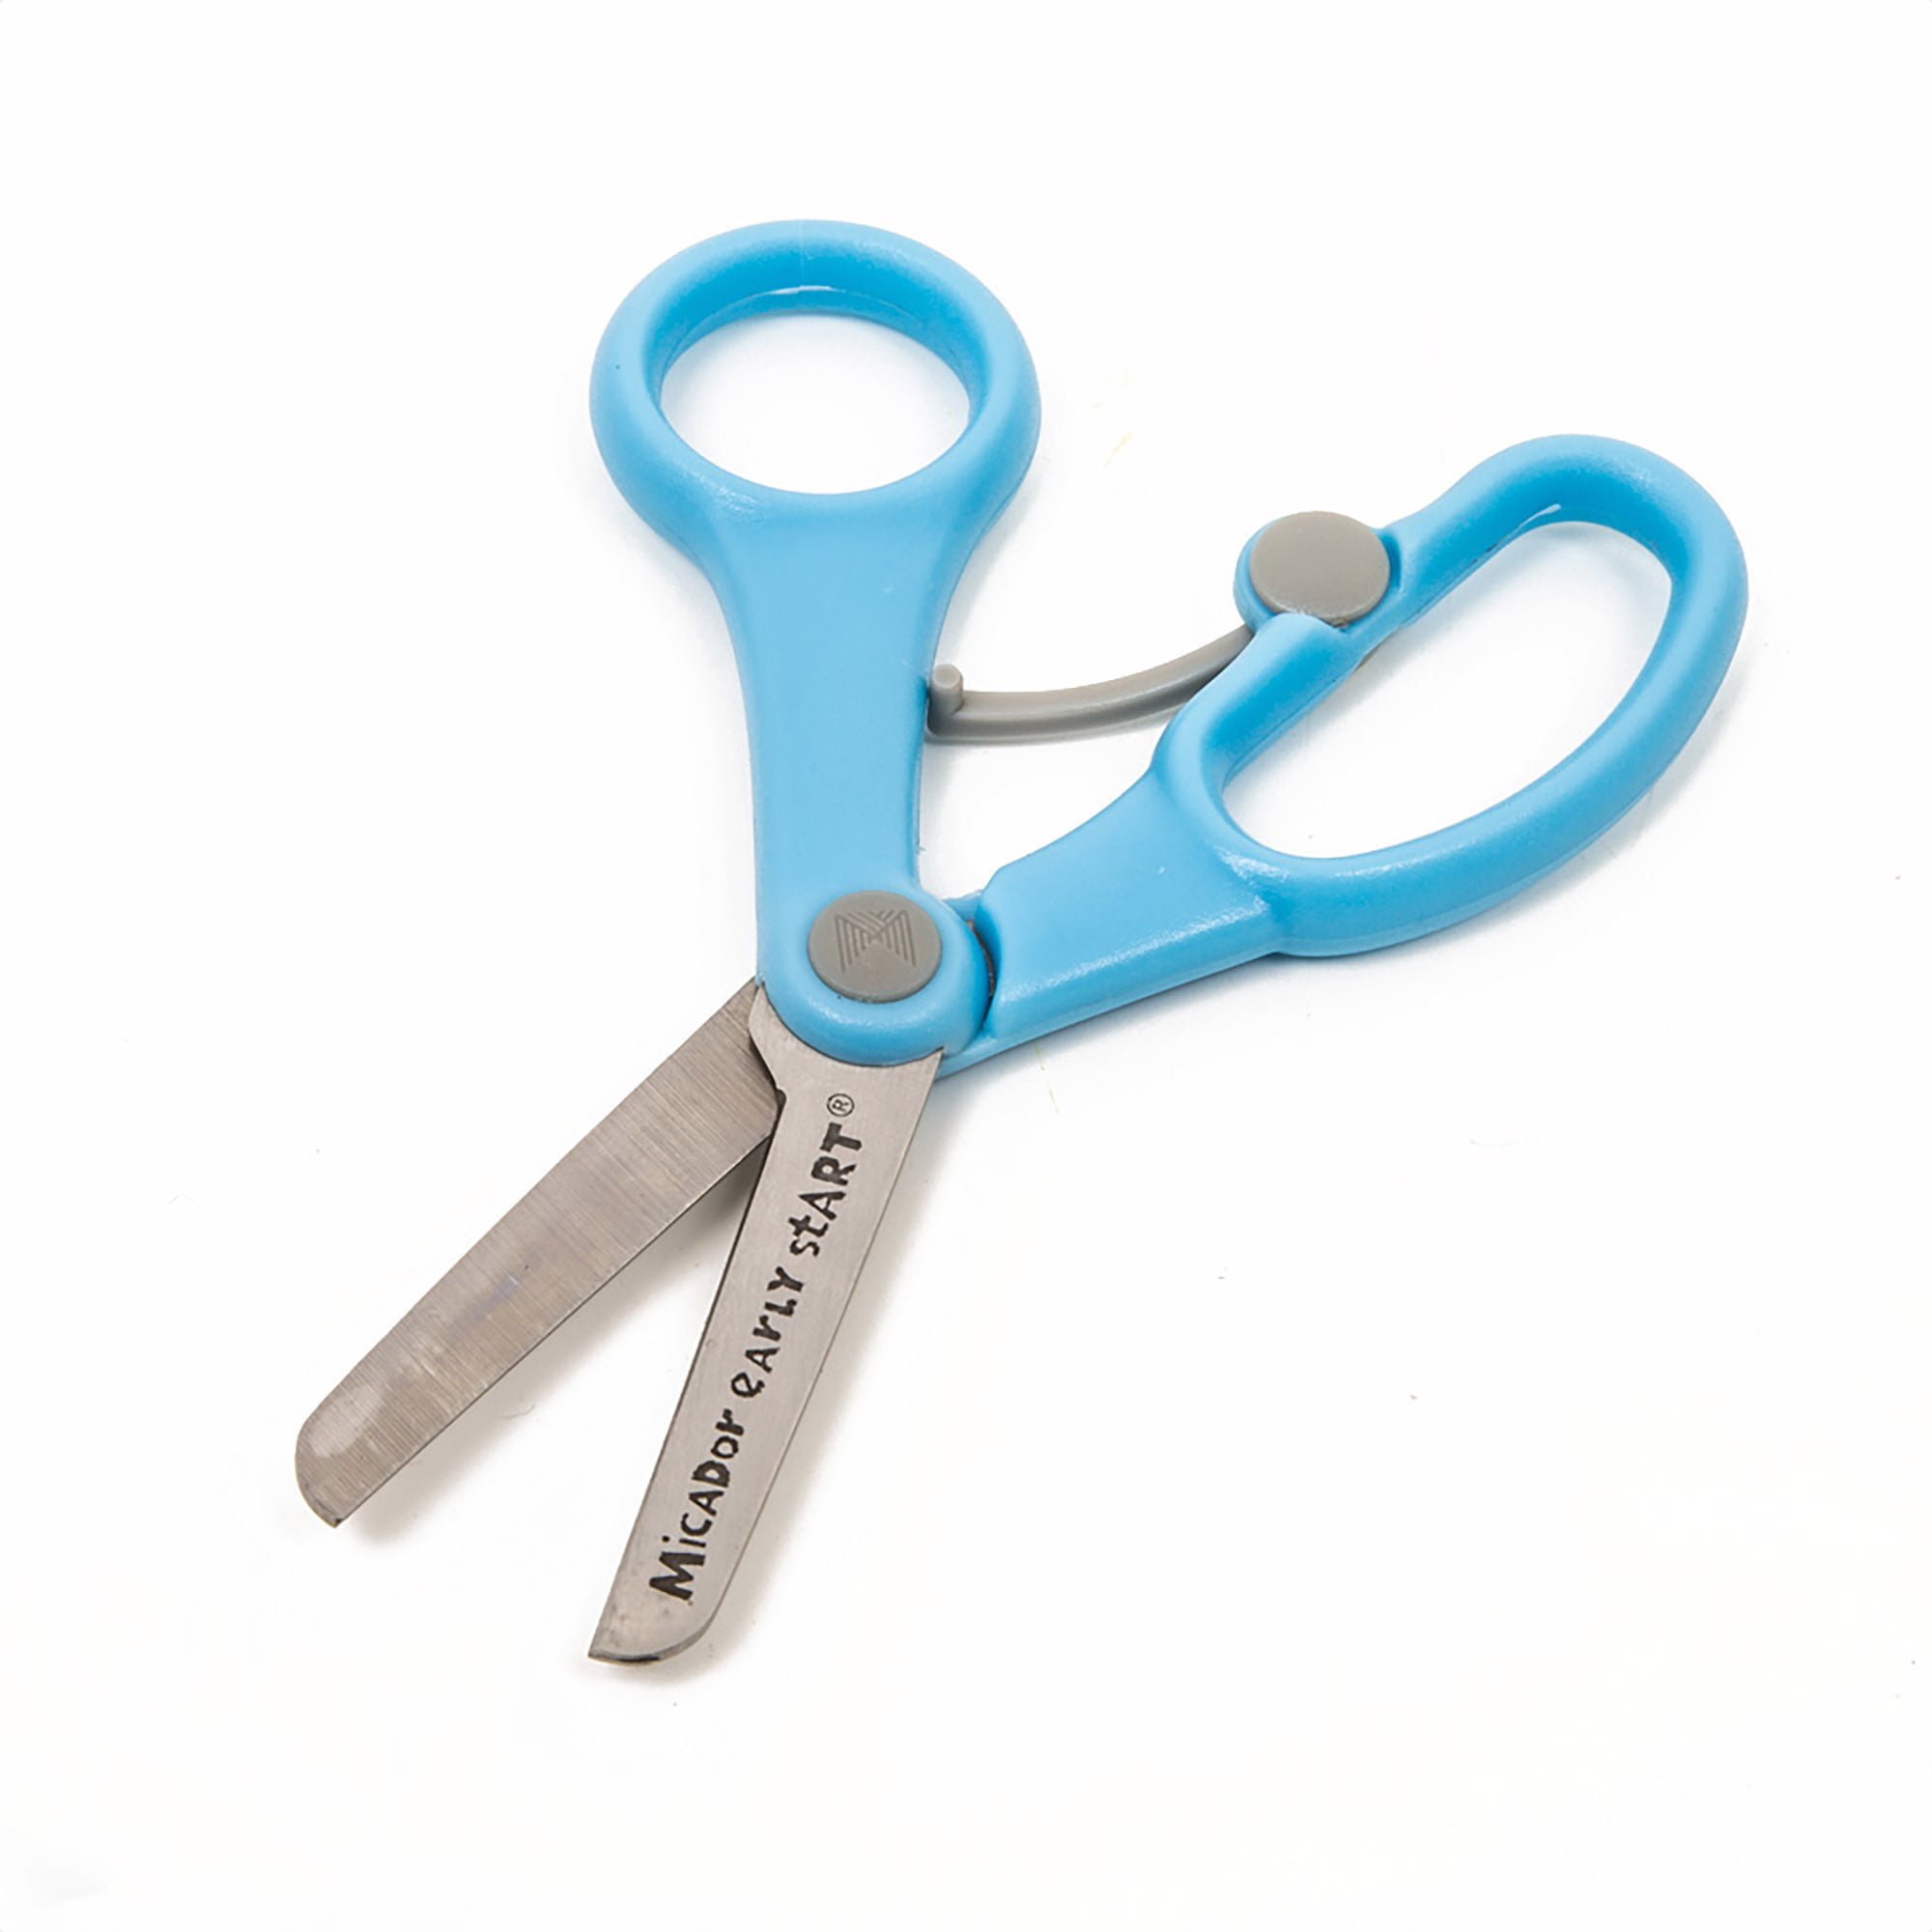 Micador Early Start Safety Scissors - Blue